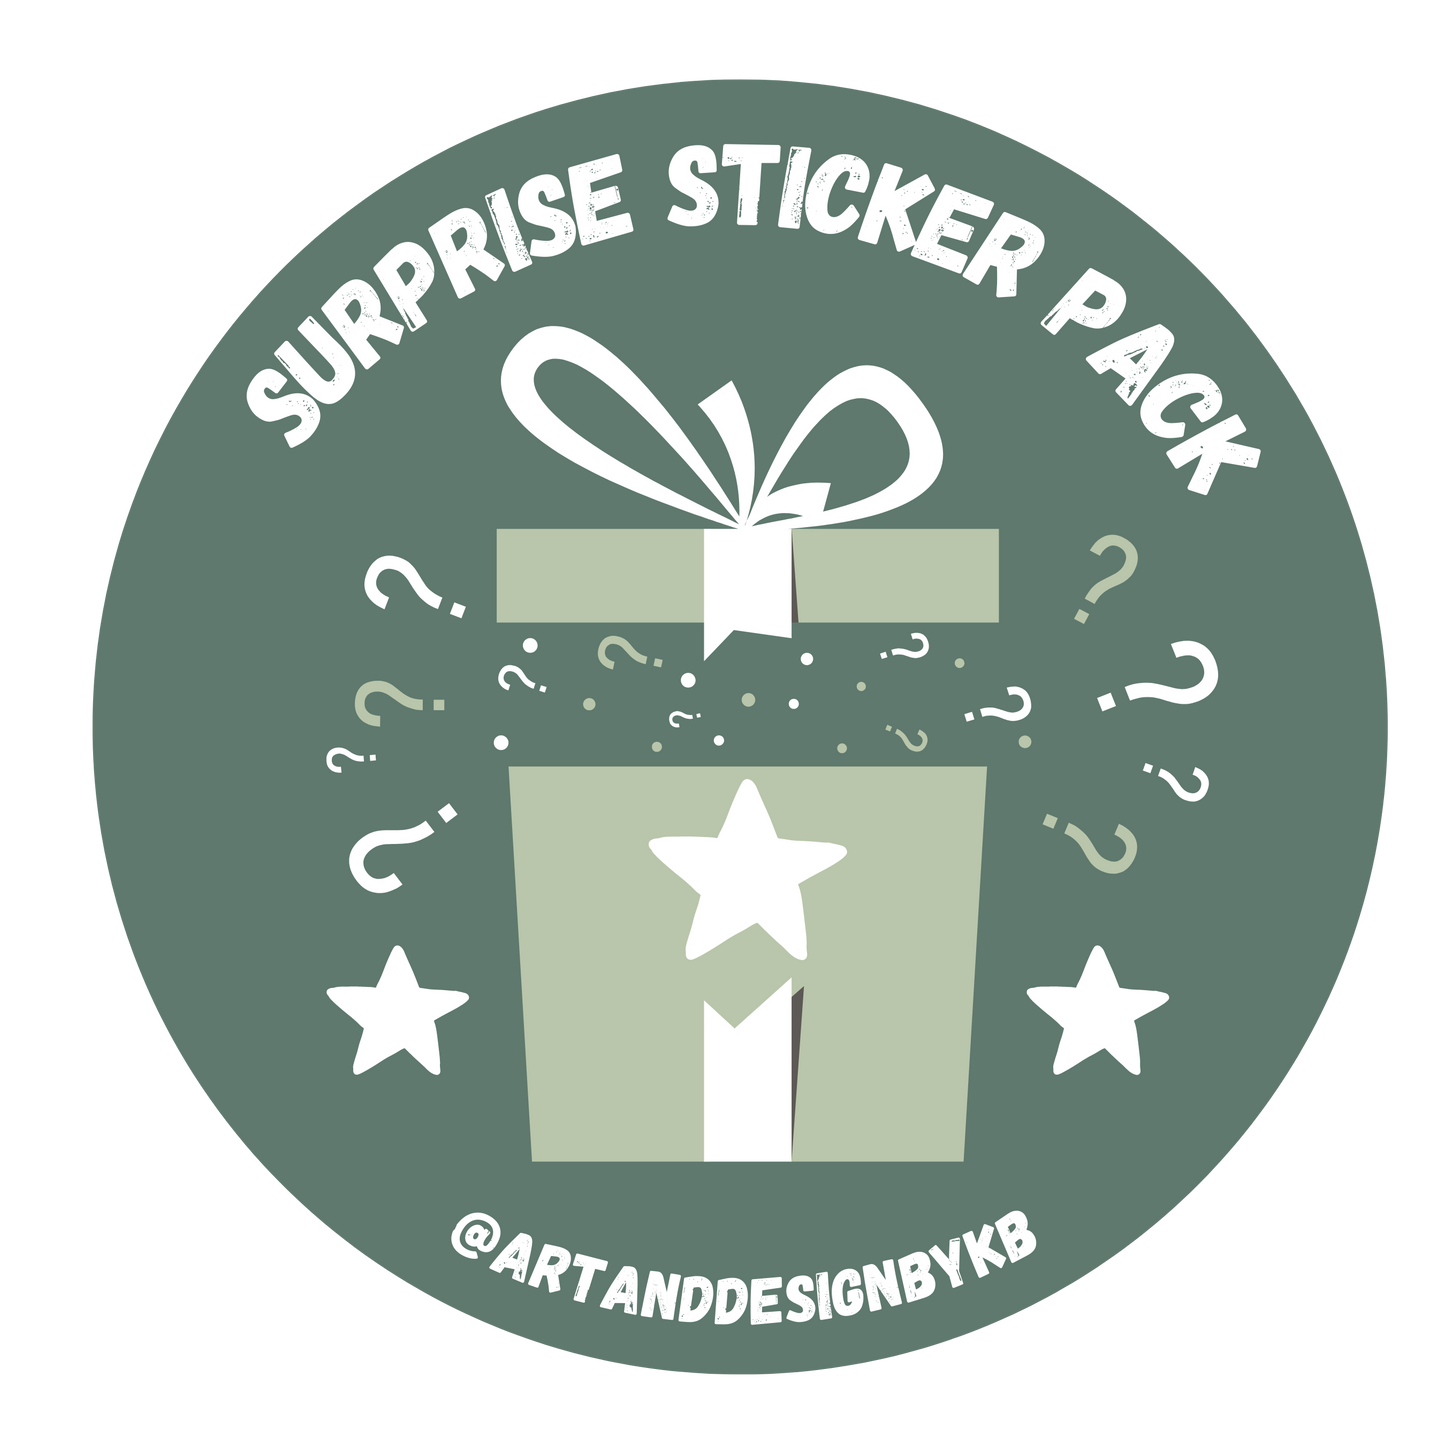 Mystery Sticker Pack | A randomly selected bundle of die cut stickers